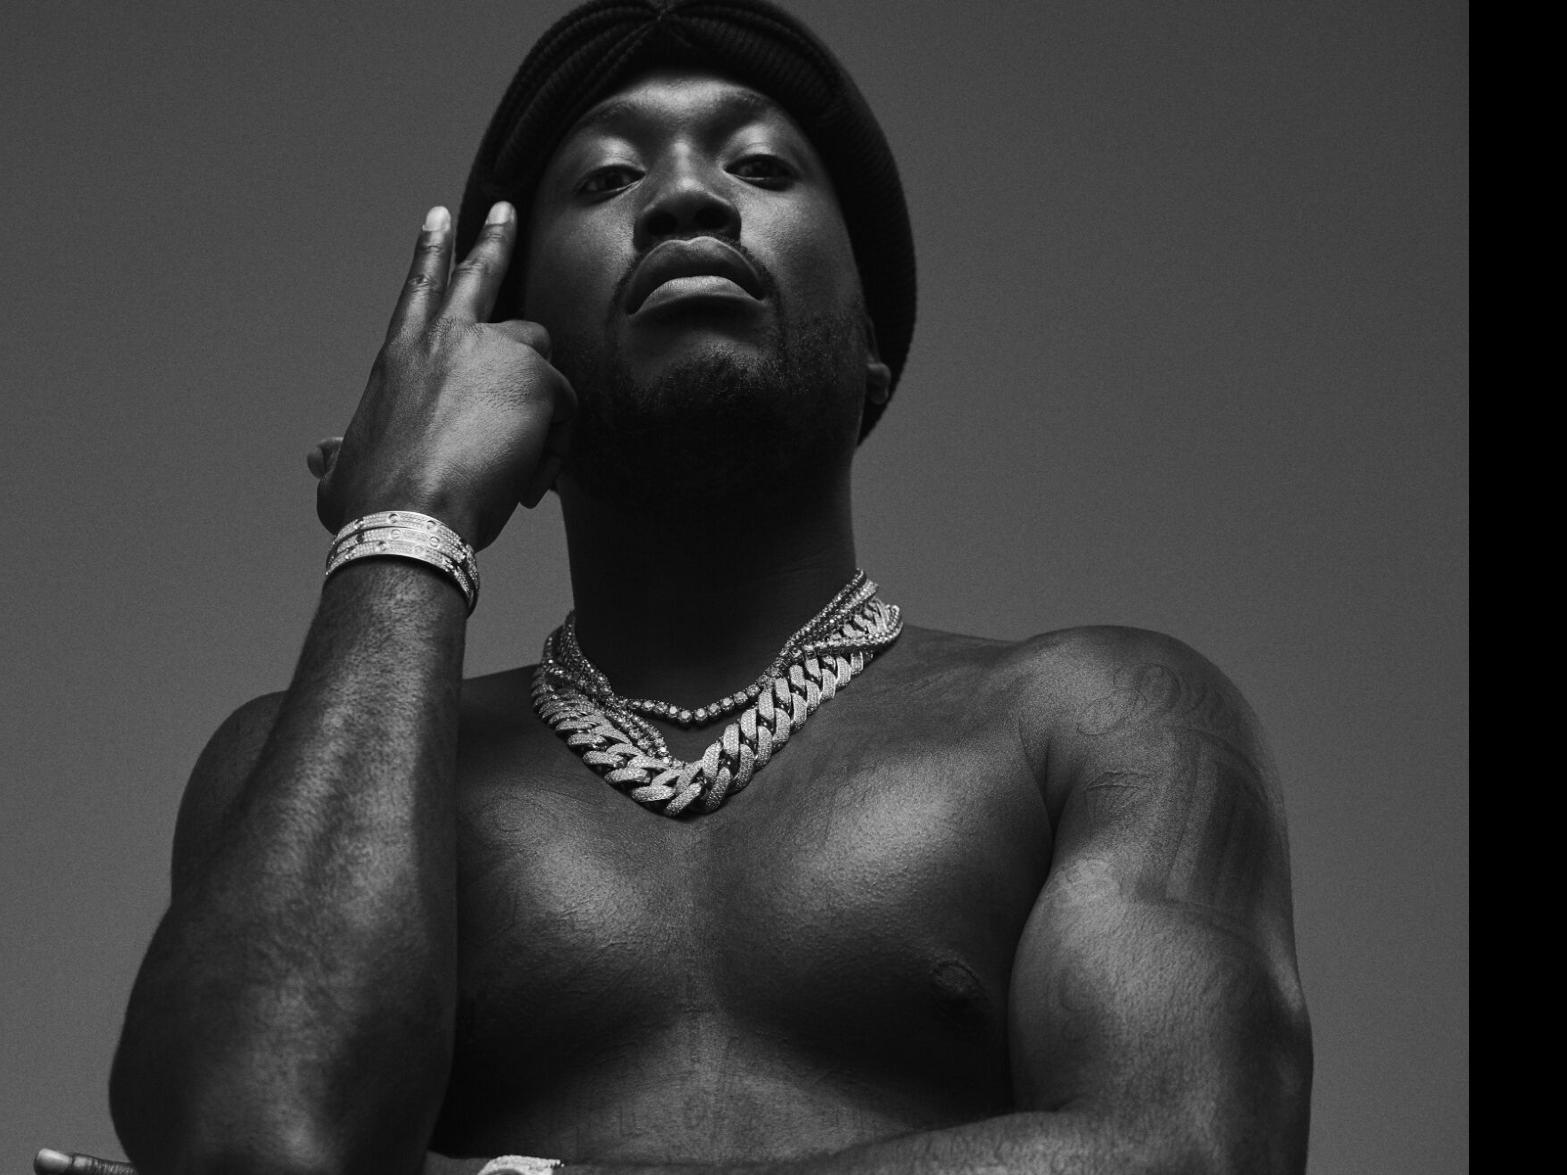 Meek Mill's 'Expensive Pain' comes with a heavy cost